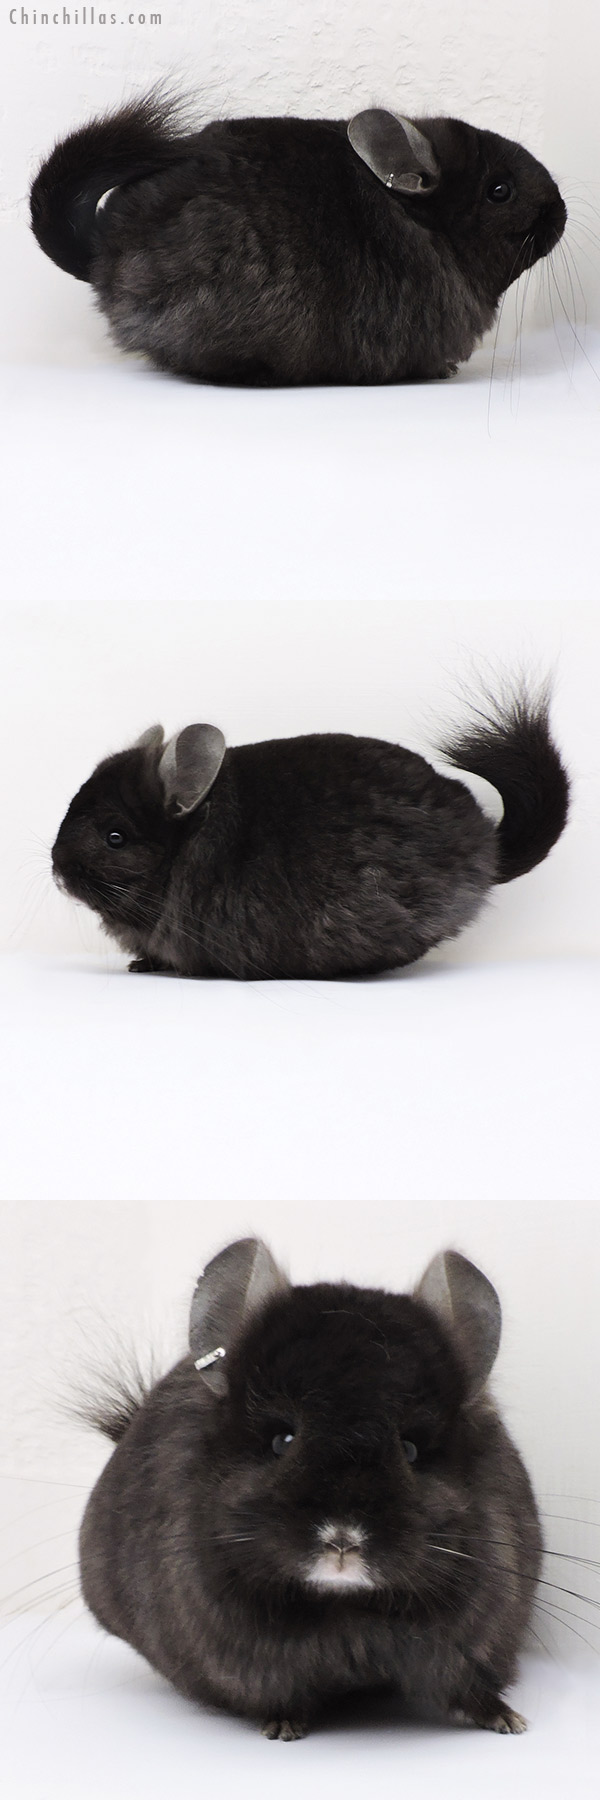 Chinchilla or related item offered for sale or export on Chinchillas.com - 18175 Exceptional Ebony  Royal Persian Angora Female Chinchilla